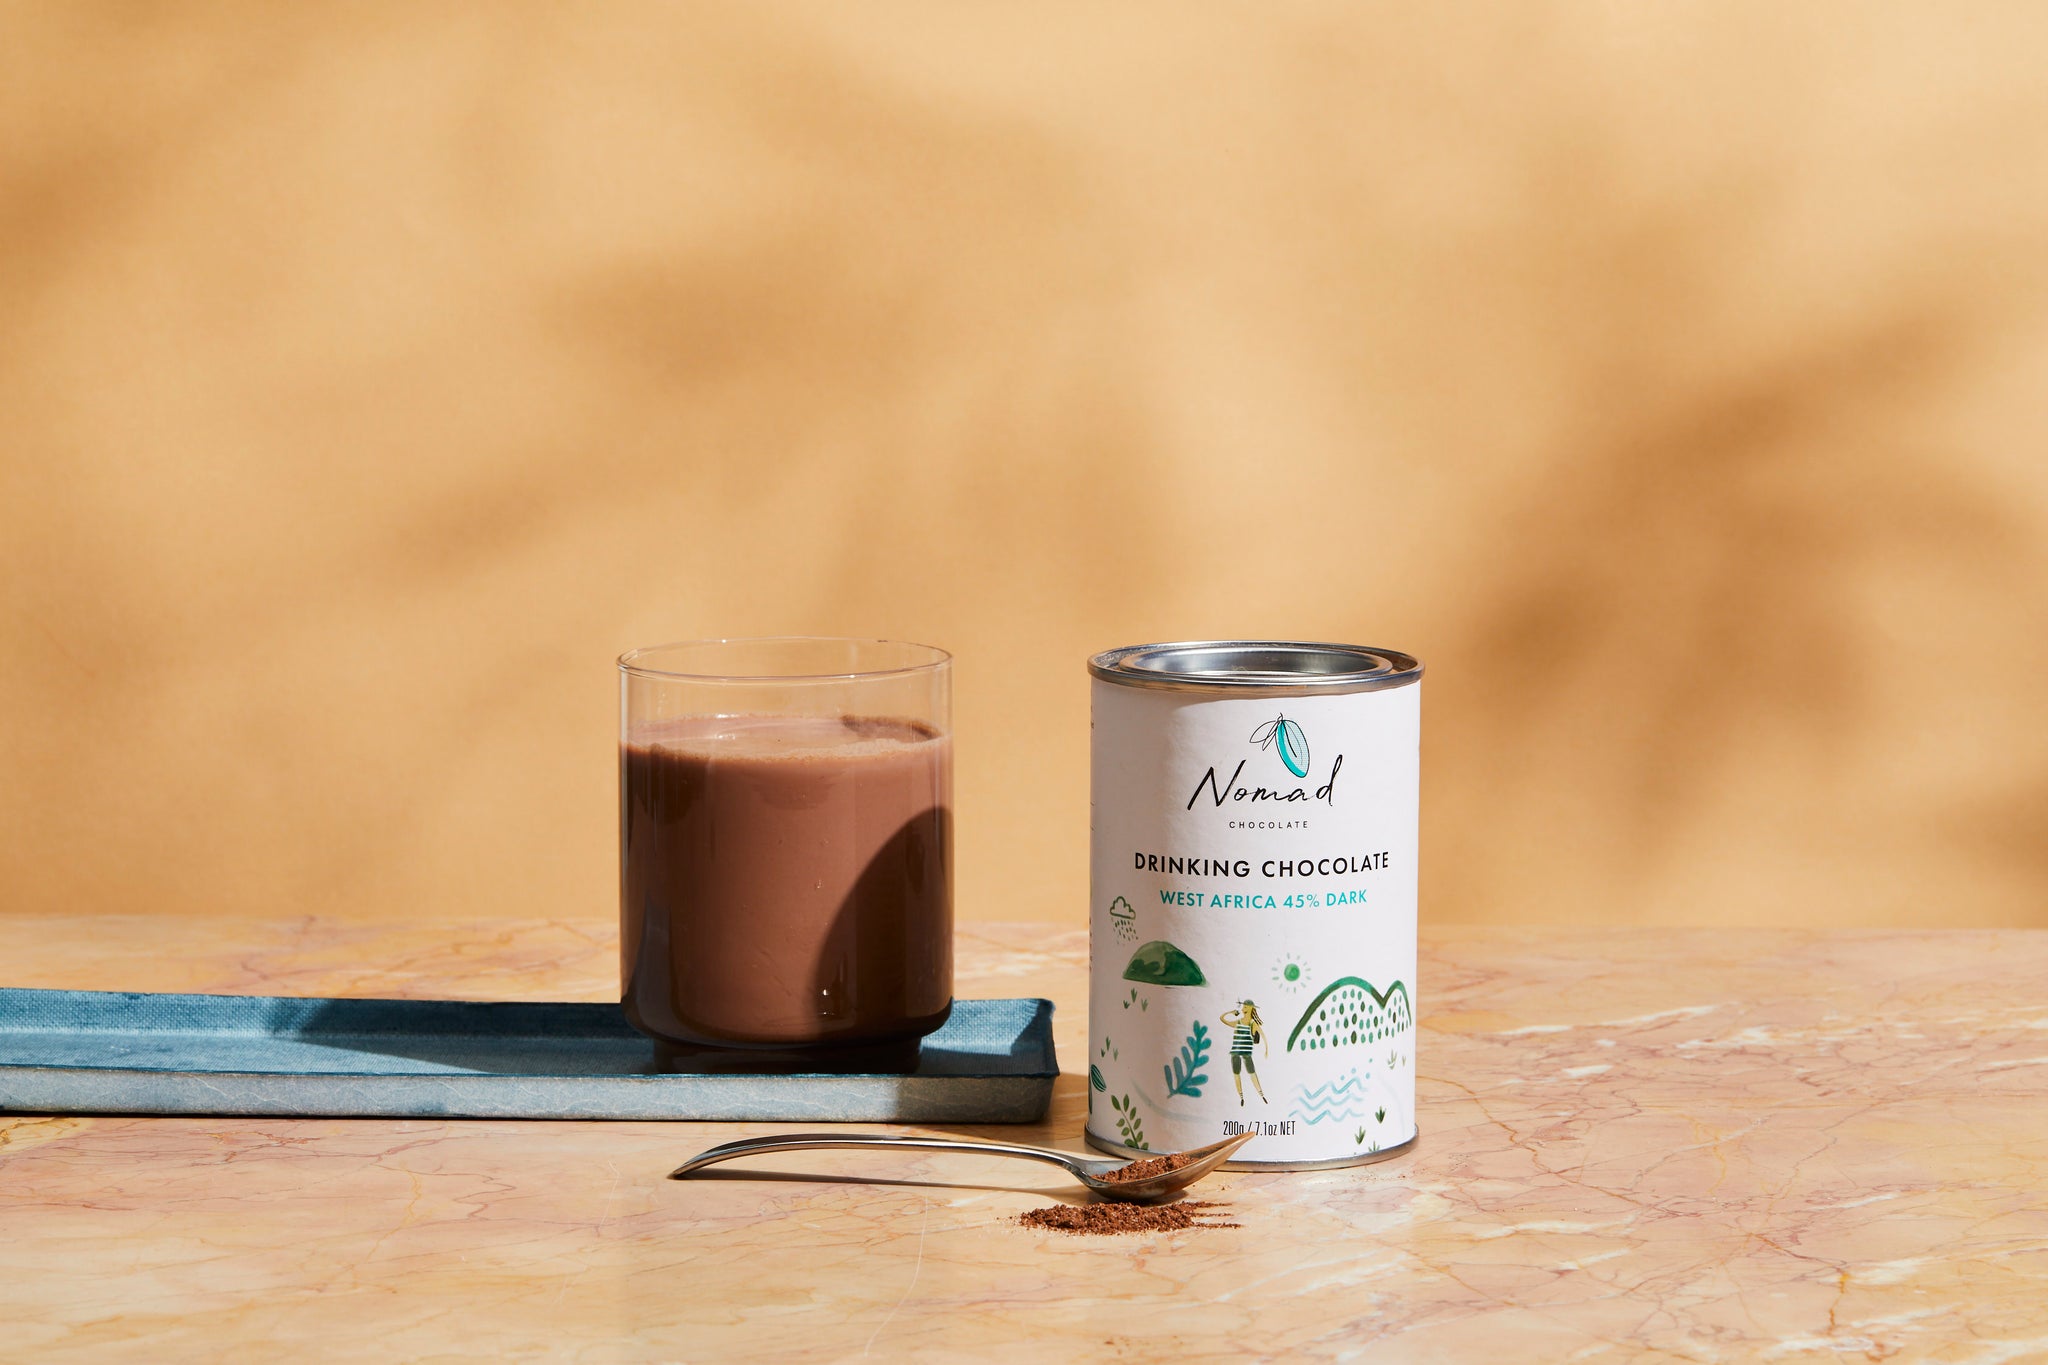 Nomad Chocolate's West Africa 45% Dark Hot Chocolate is Now Available at Woolworths